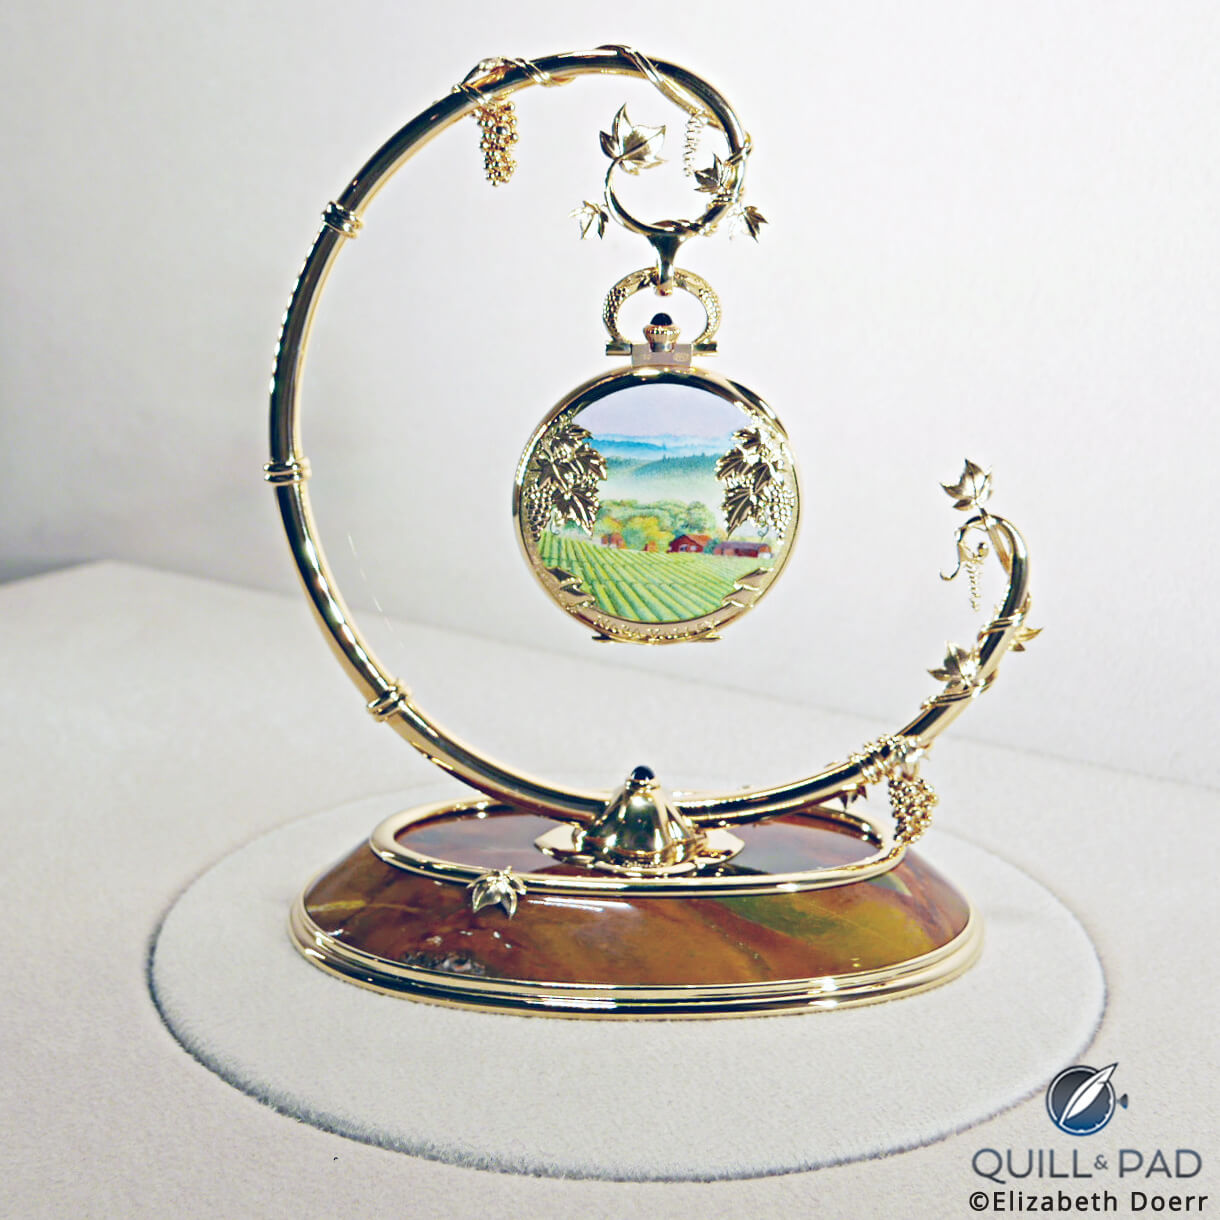 Beautifully detailed miniature landscape painting on the back of the unique piece Patek Philippe created for the Art of Watches Grand Exhibition in New York